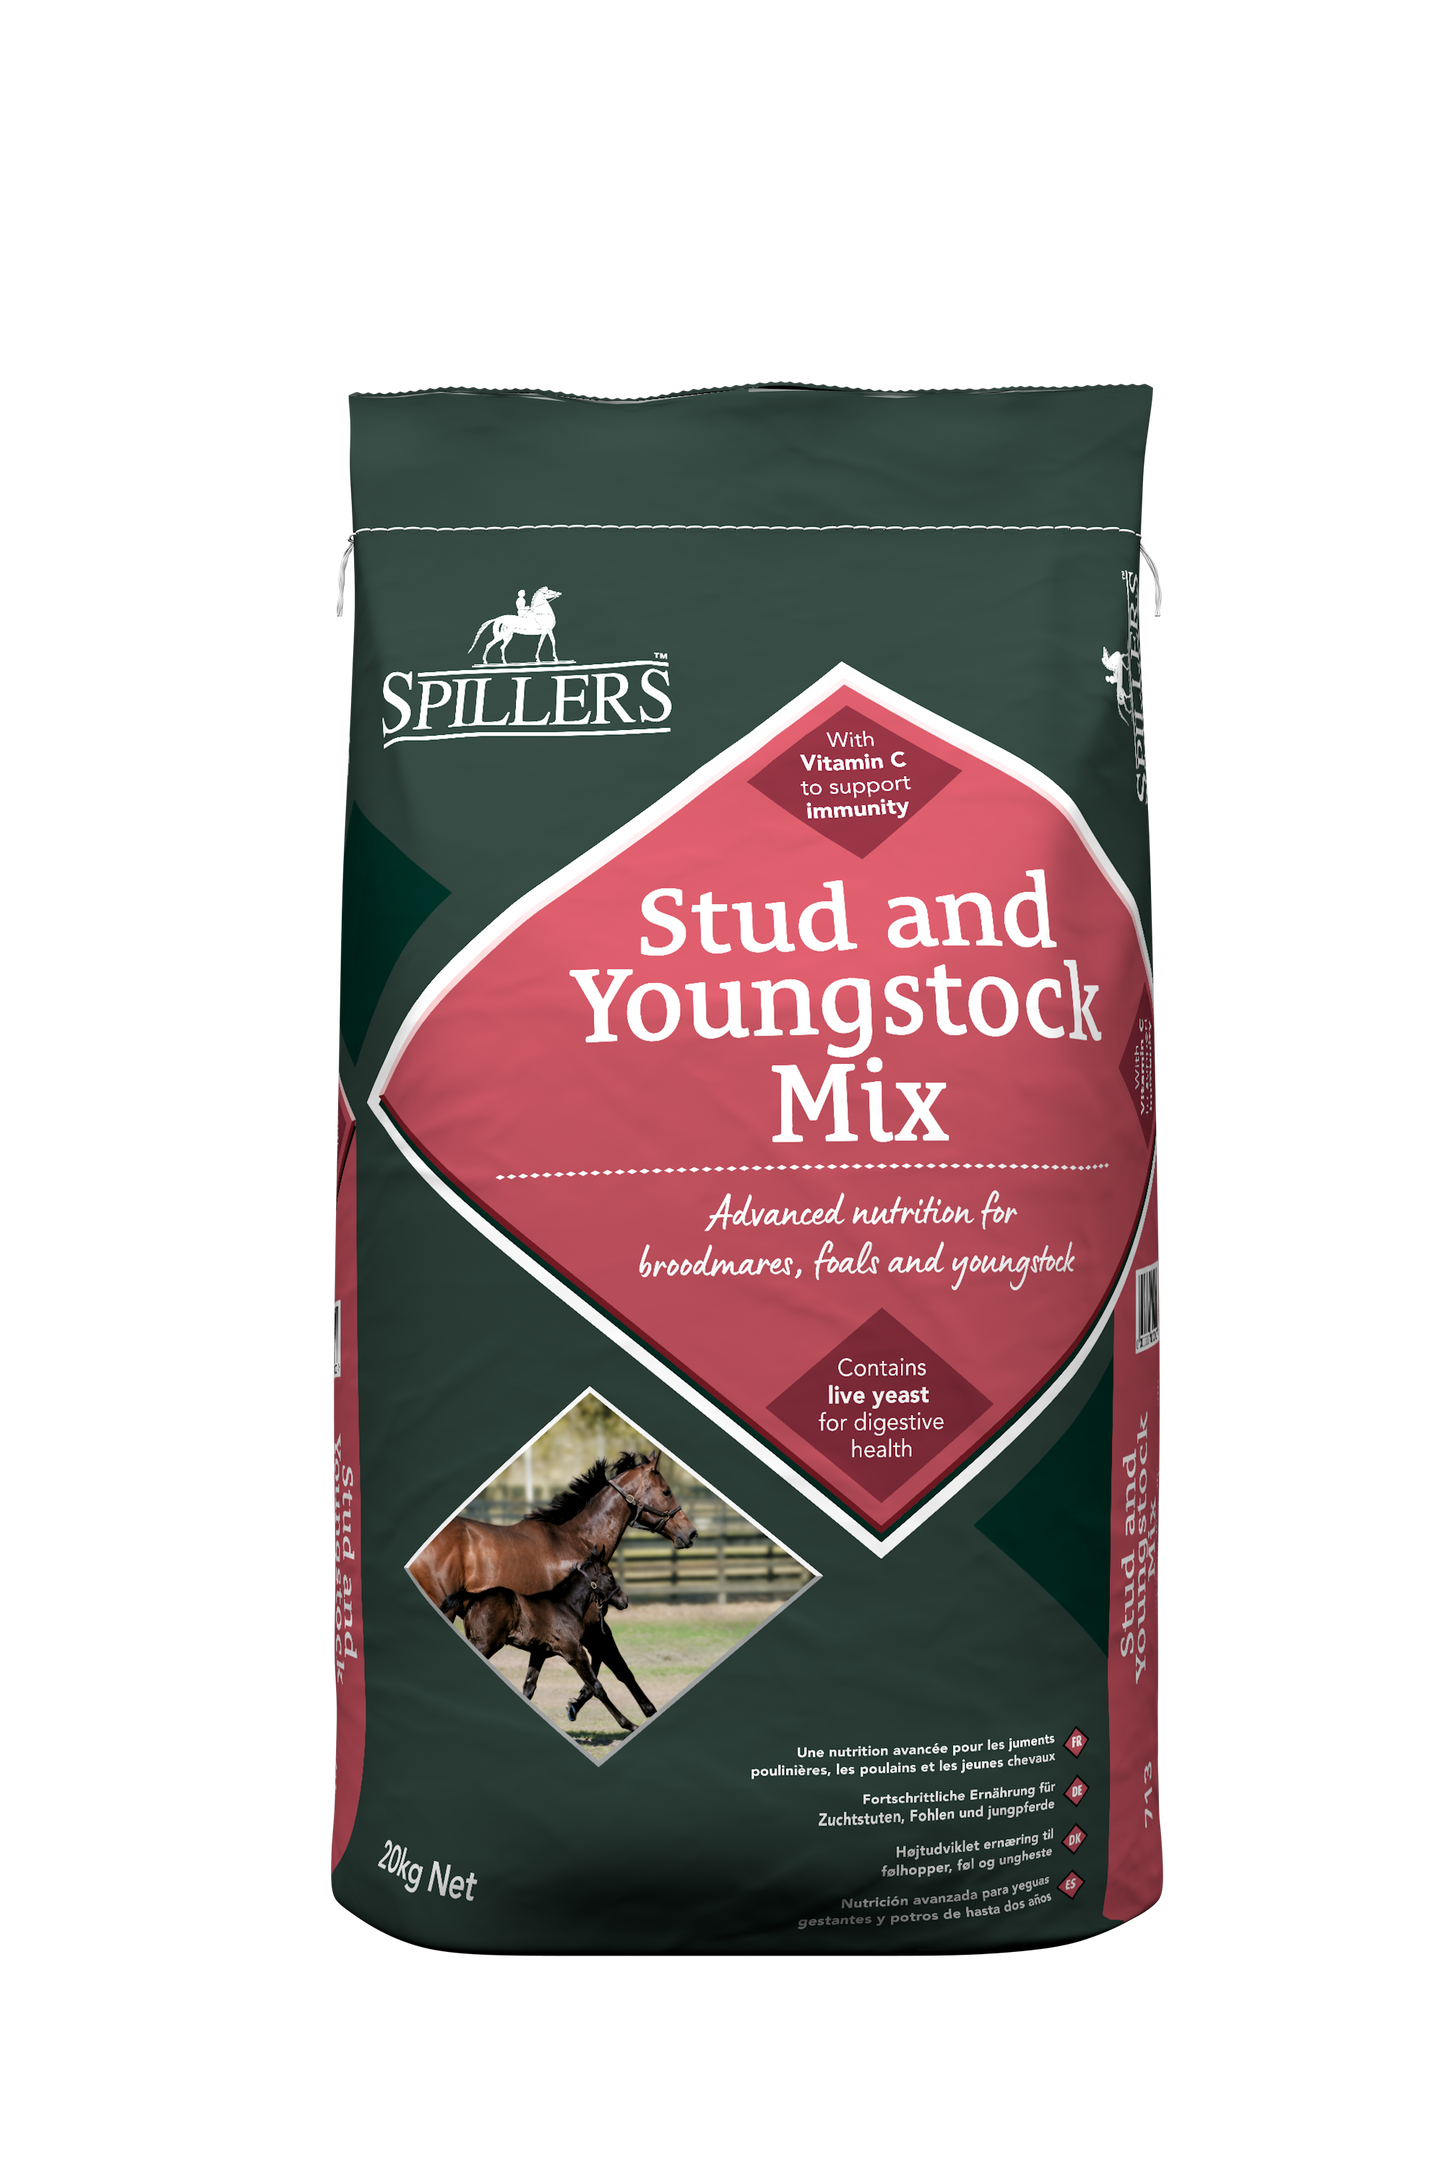 Stud and Youngstock Mix